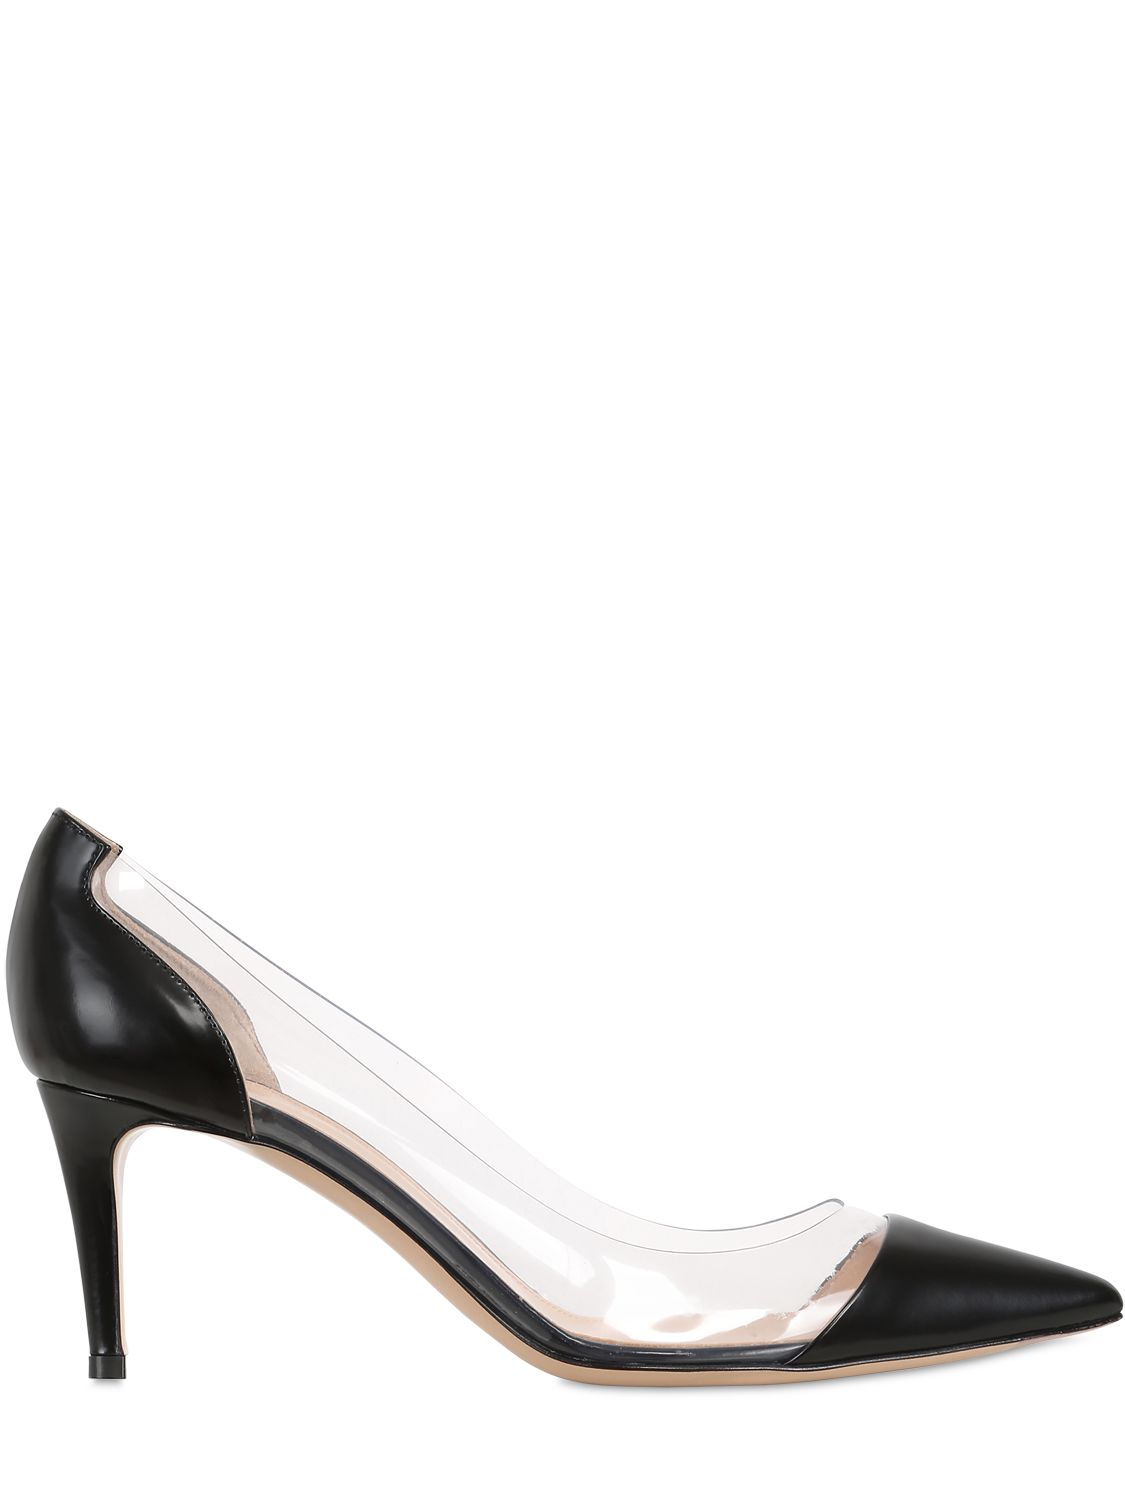 Gianvito Rossi 70mm Leather Pumps in Black - Lyst